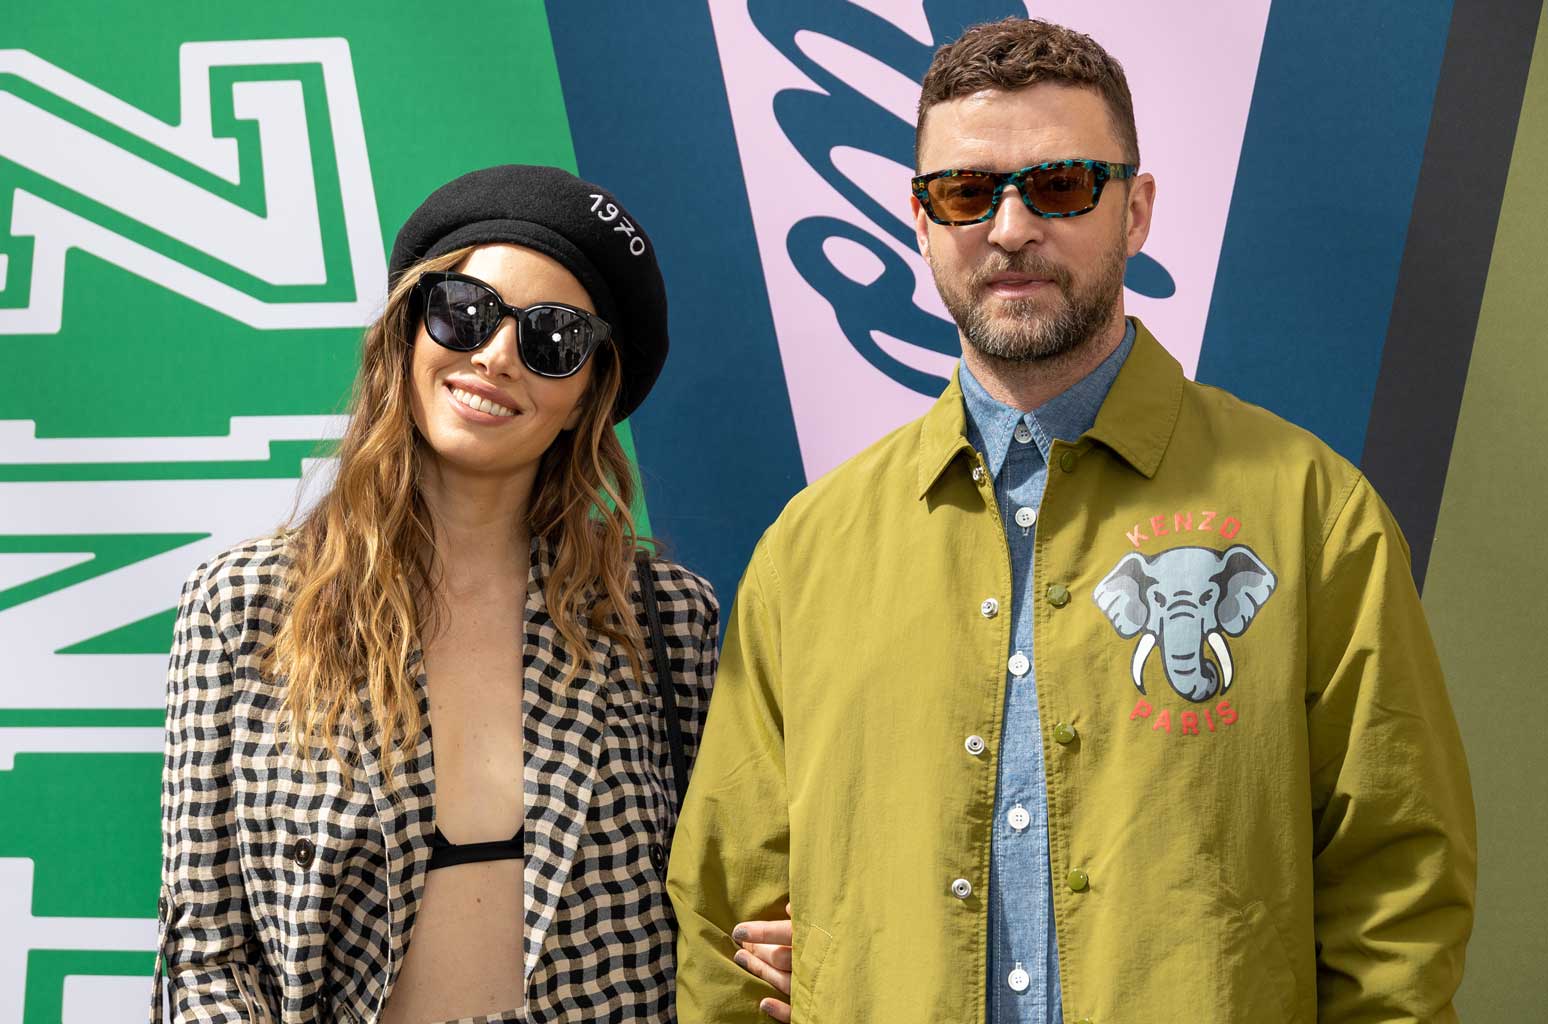 Justin Timberlake Agrees With Viral Comment His ‘Girlfriend Looks Like